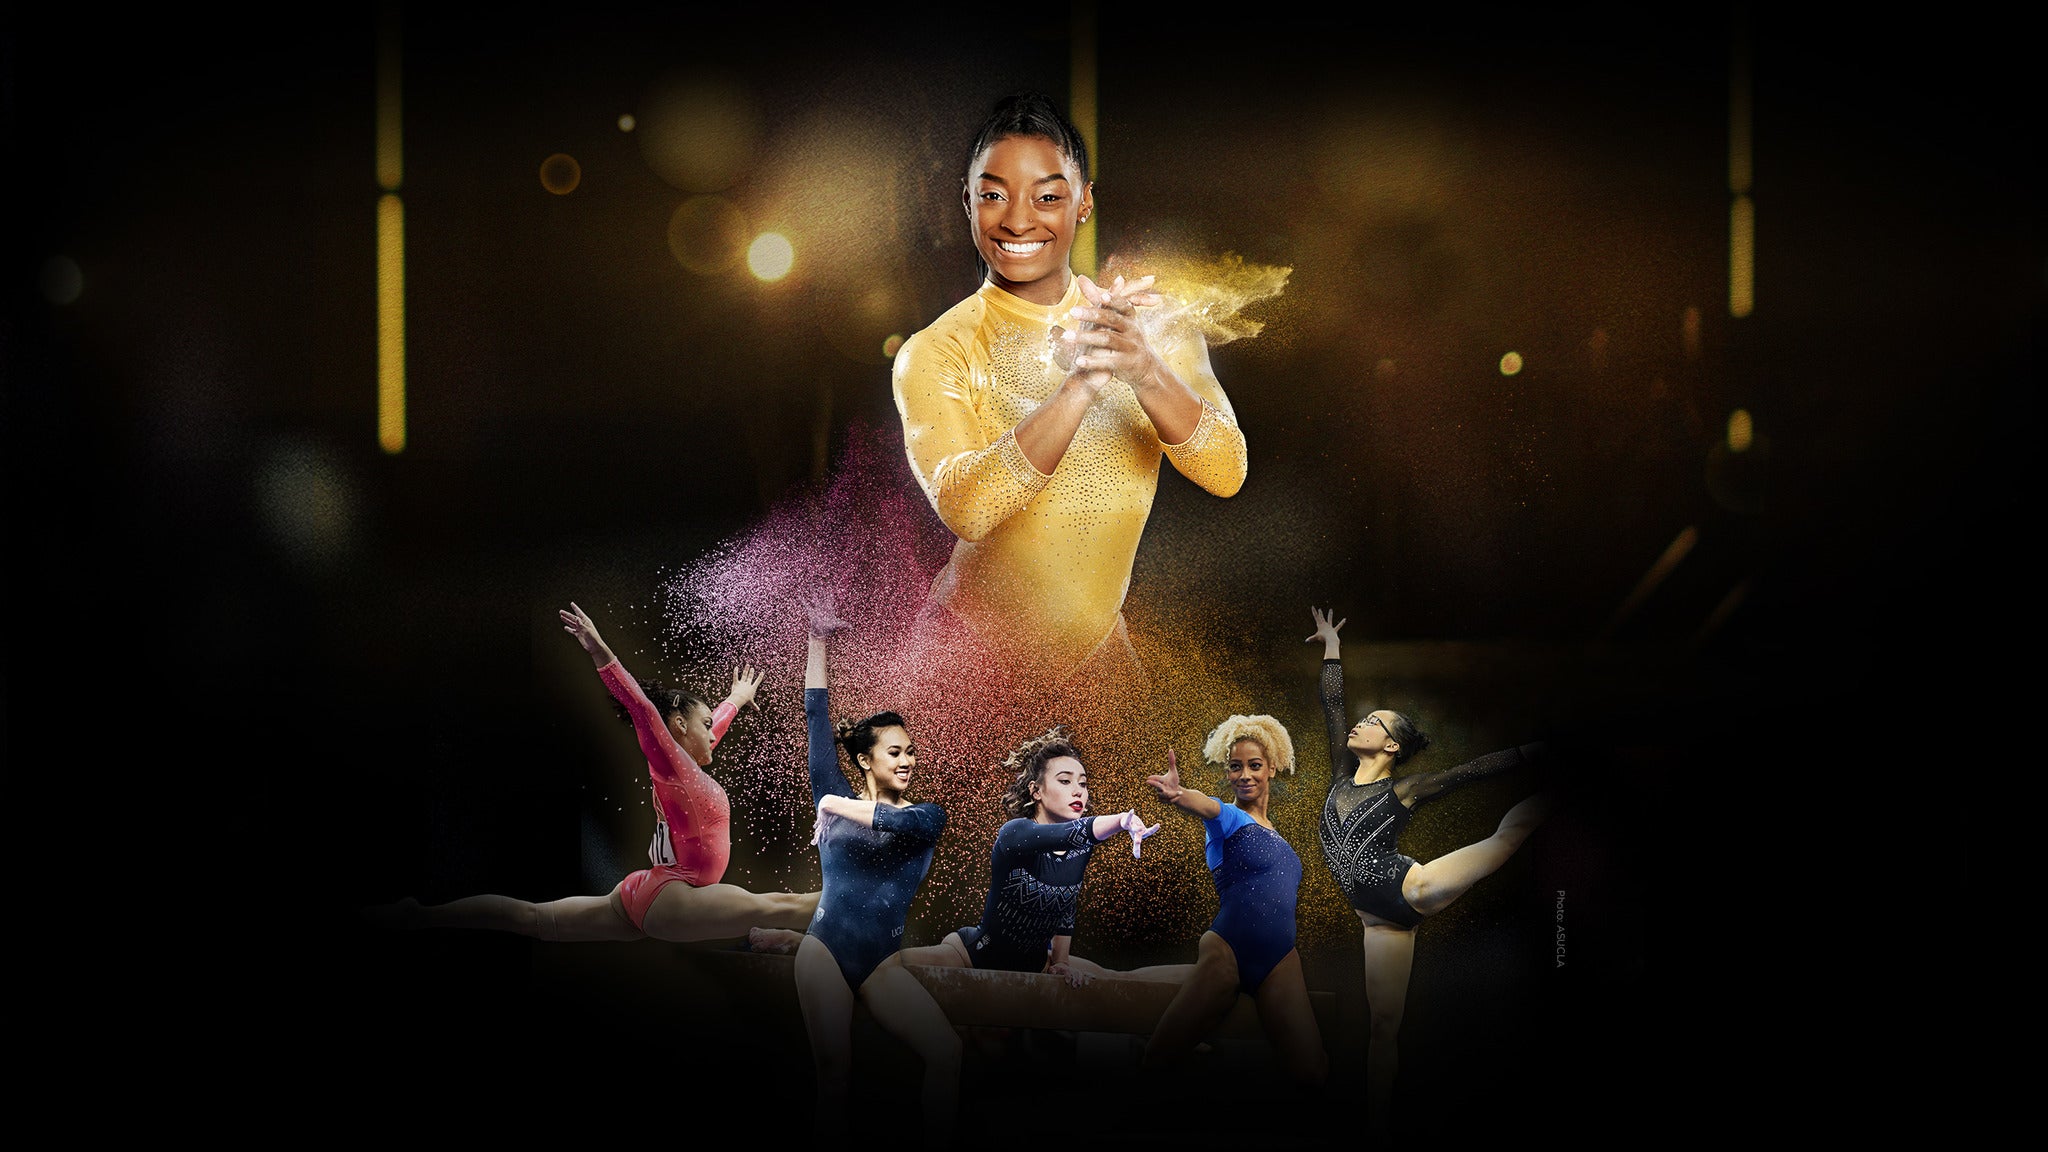 G.O.A.T. Gold Over America Tour Starring Simone Biles in North Little Rock promo photo for VIP Package Onsale presale offer code